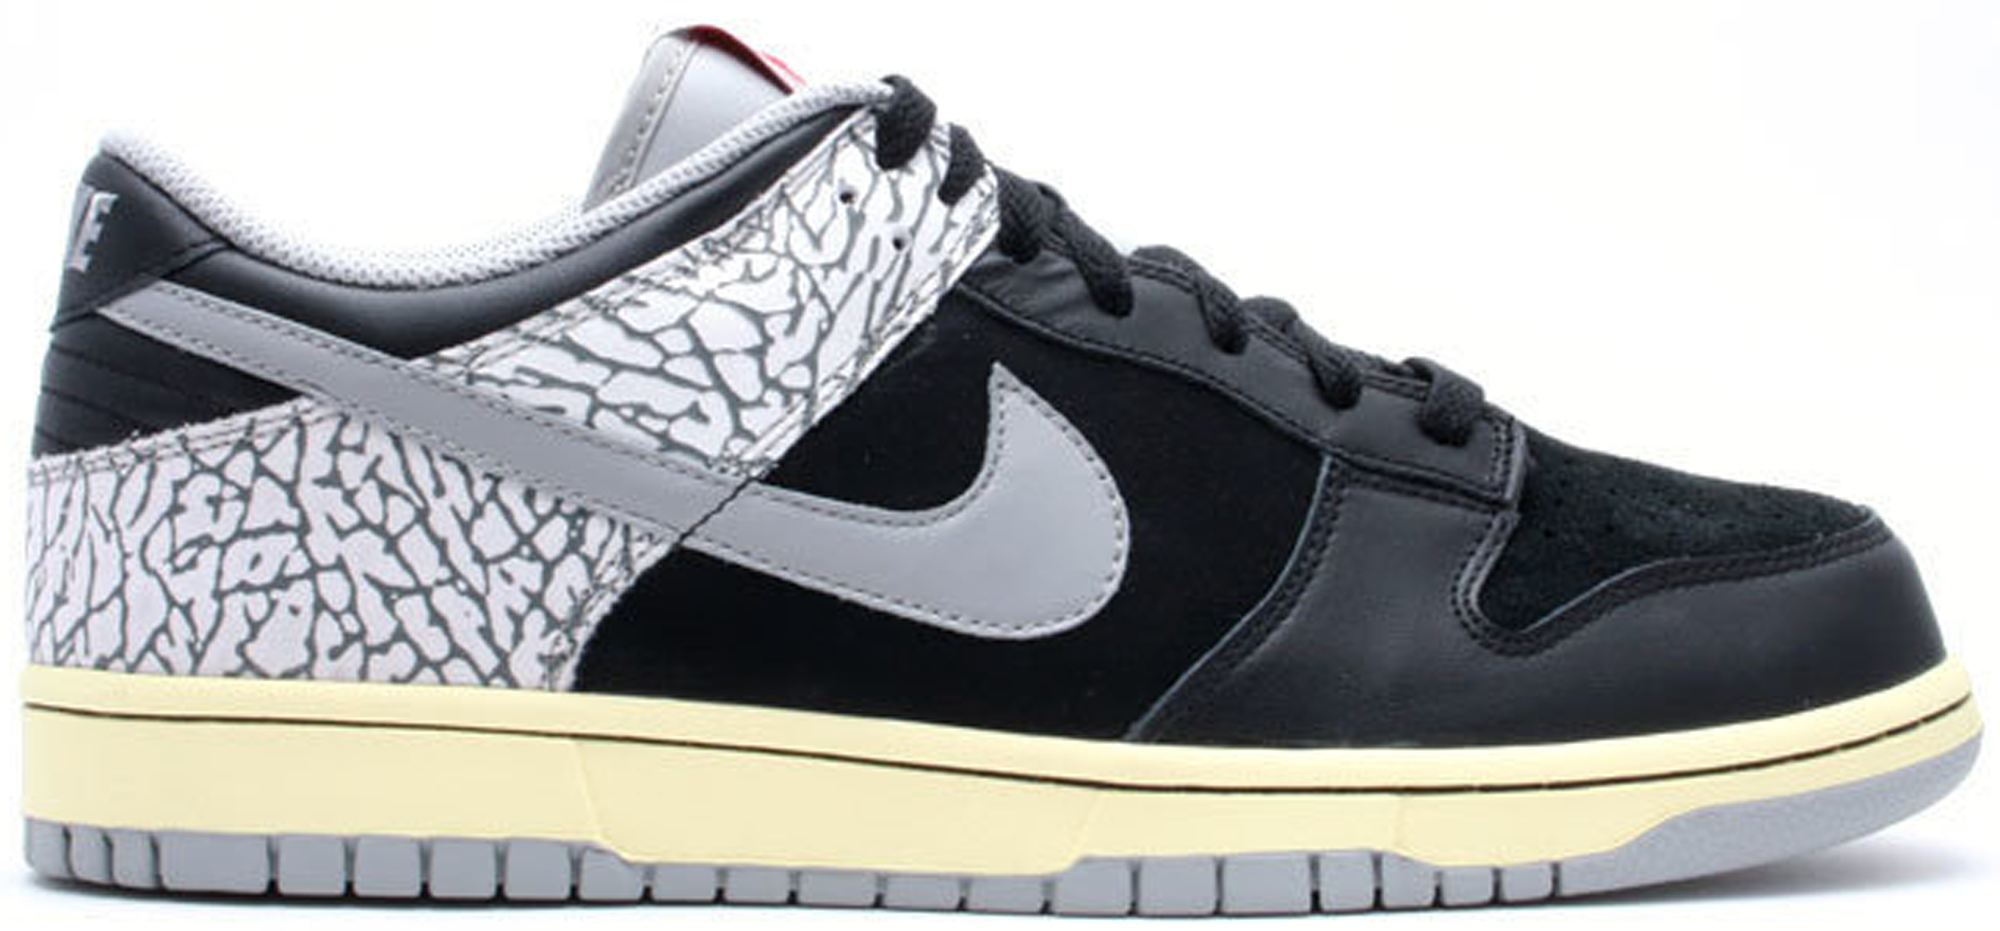 Nike Dunk Low J-Pack Black Cement (2009 